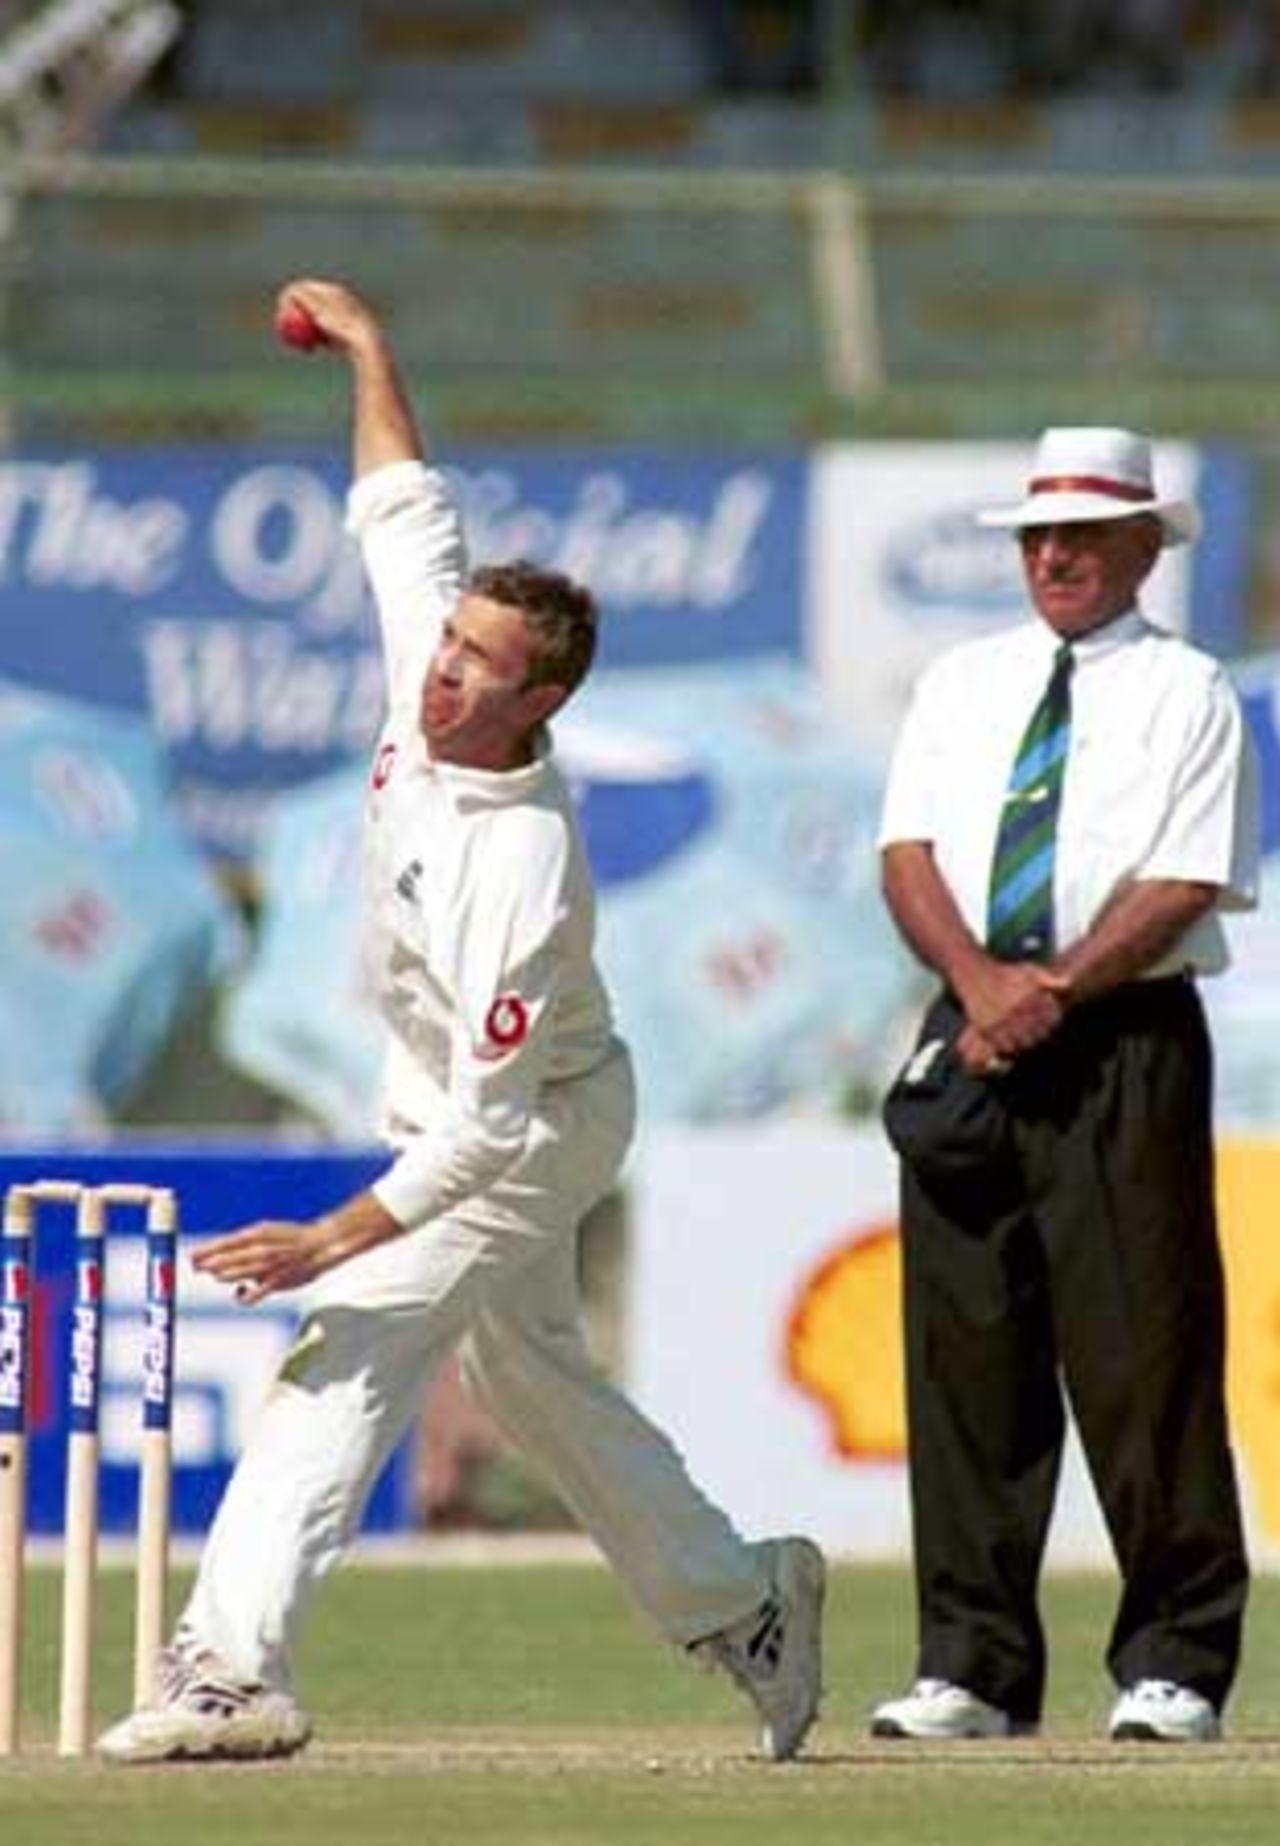 About to deliver the ball - Salisbury in his bowling stride, Day 2, 3rd Test Match, Pakistan v England at Karachi, 7 Dec-11 Dec 2000.